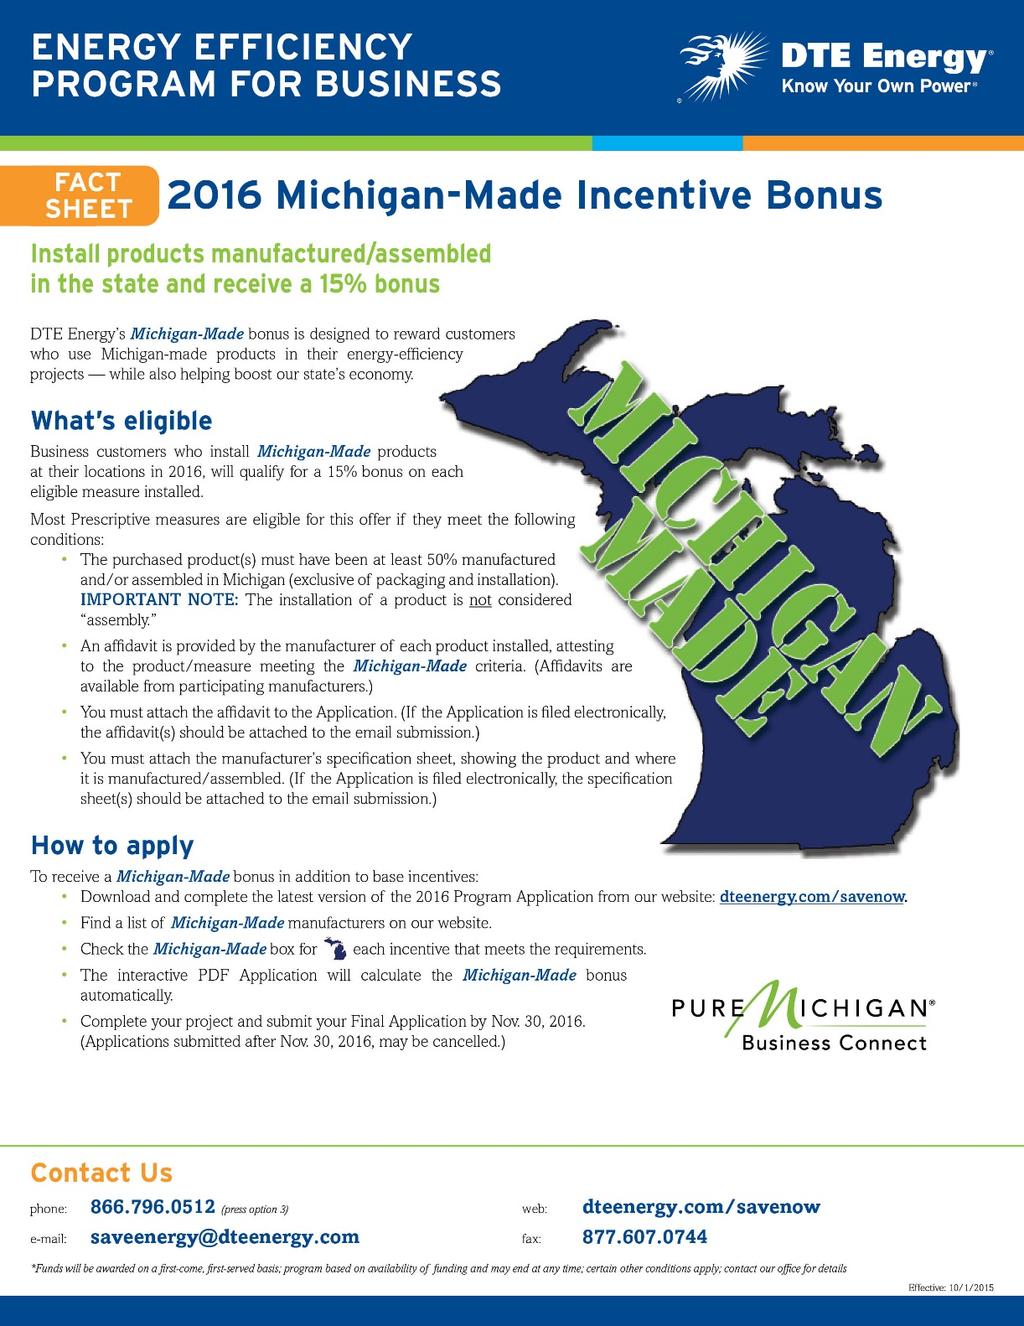 Special Offers Michigan-Made bonus 15% bonus for certain installed equipment that is 50% manufactured and/or assembled in Michigan (excluding packaging).